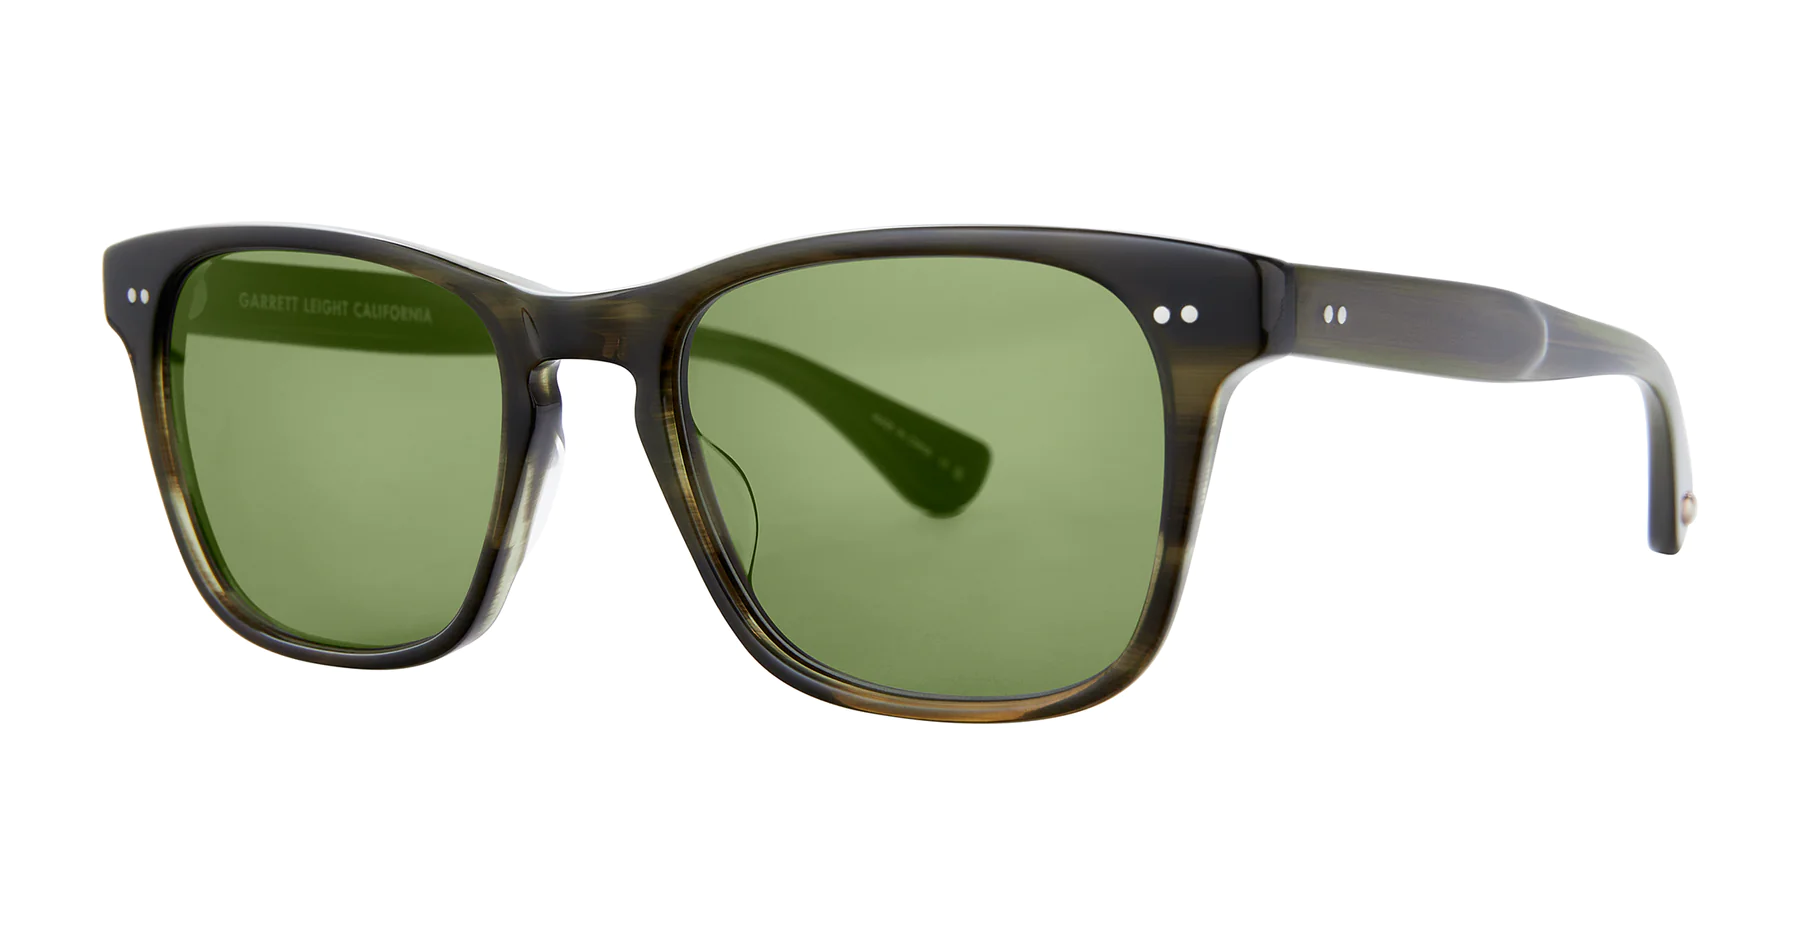 Sunglasses_Torrey_2148_DGFR_GRN_2_1800x_625e8706-07fb-4f03-a3f9-a70bc605b6f7.png